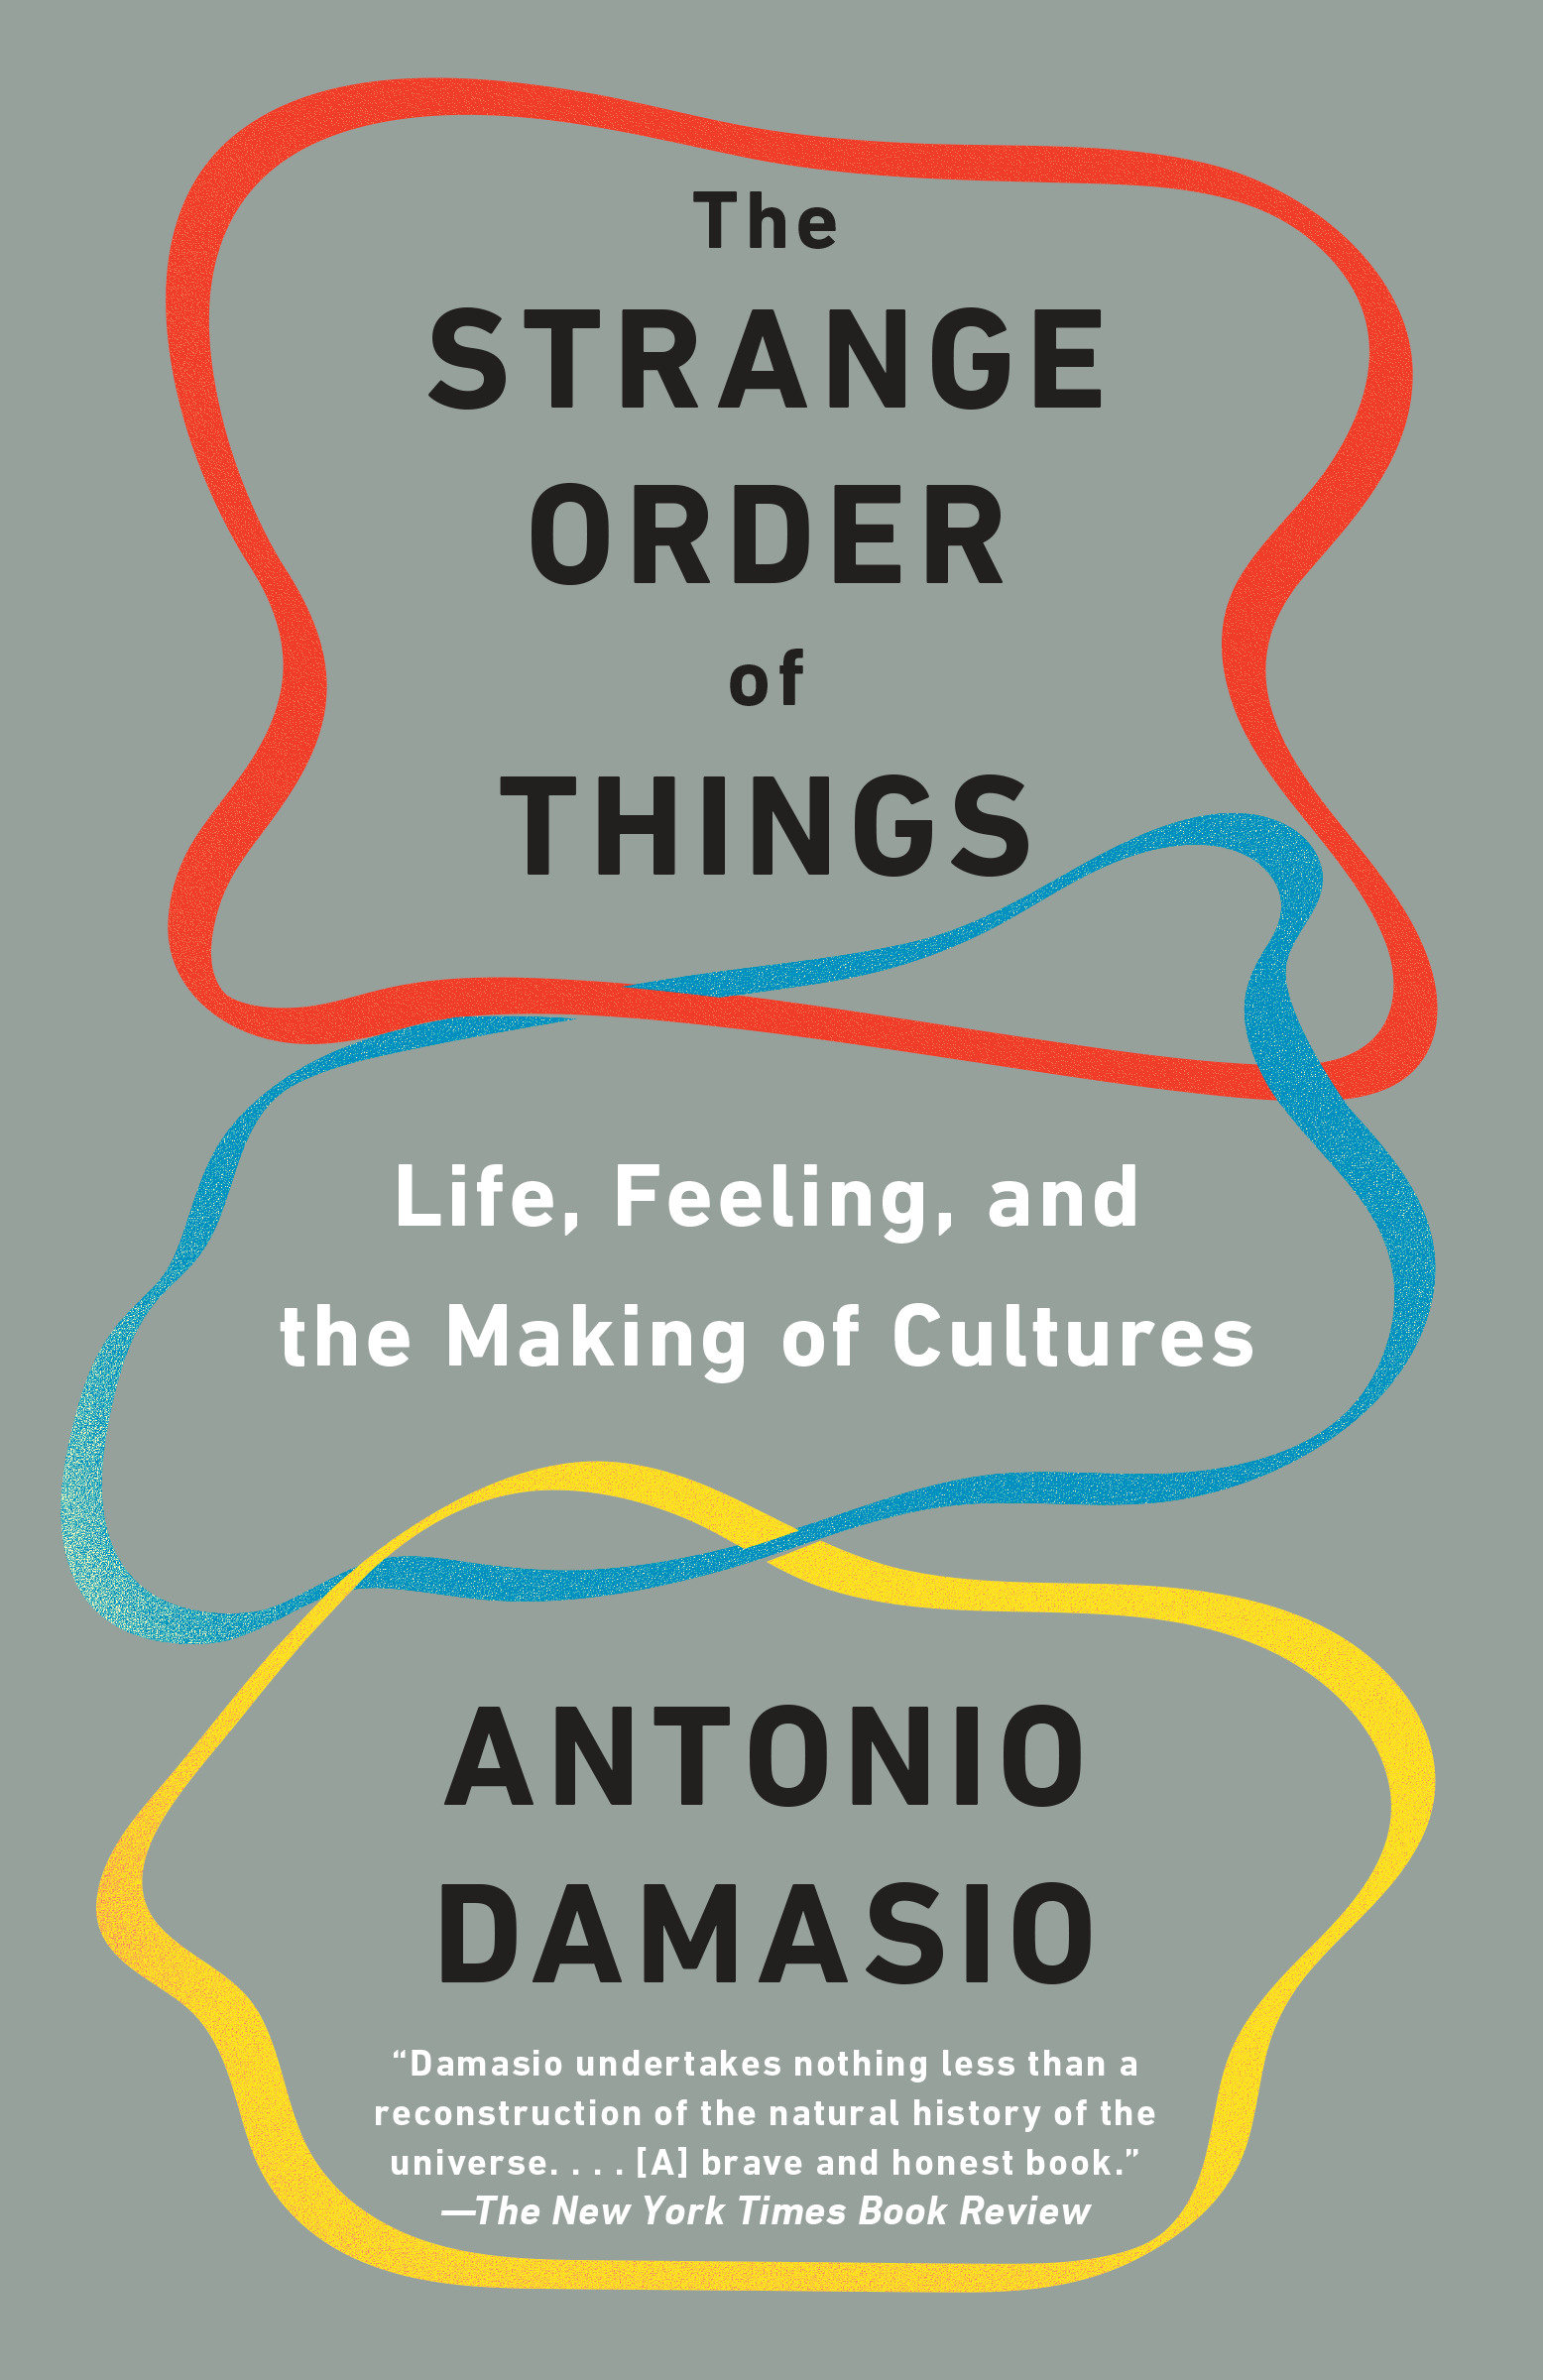 Image de couverture de The Strange Order of Things [electronic resource] : Life, Feeling, and the Making of Cultures